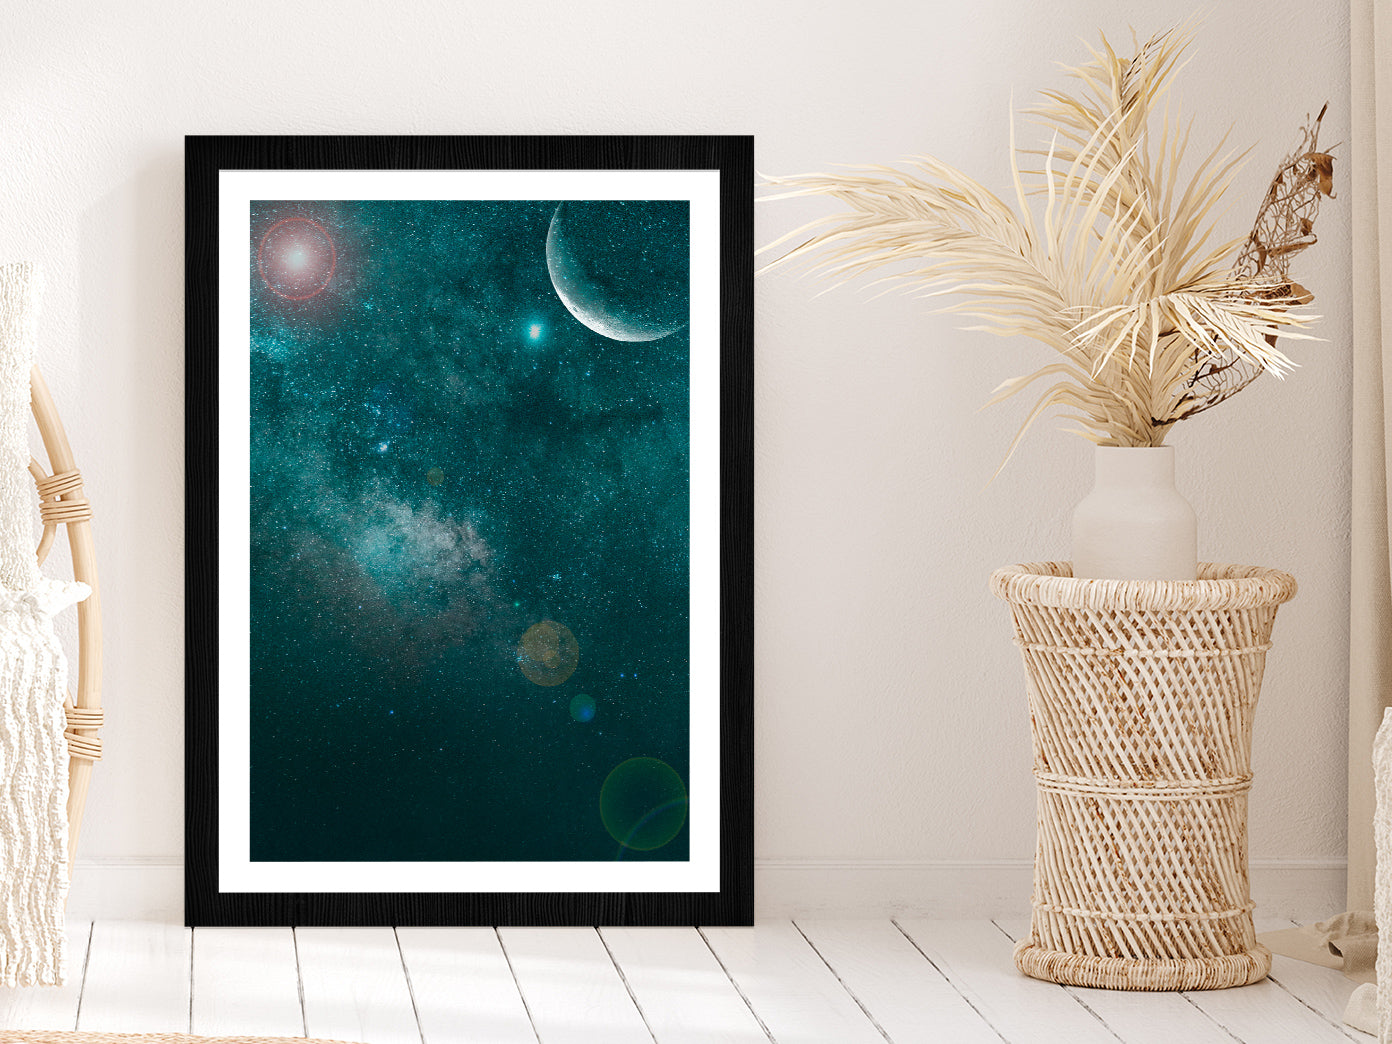 Milky Way Night Sky Clouds & Moon Glass Framed Wall Art, Ready to Hang Quality Print With White Border Black